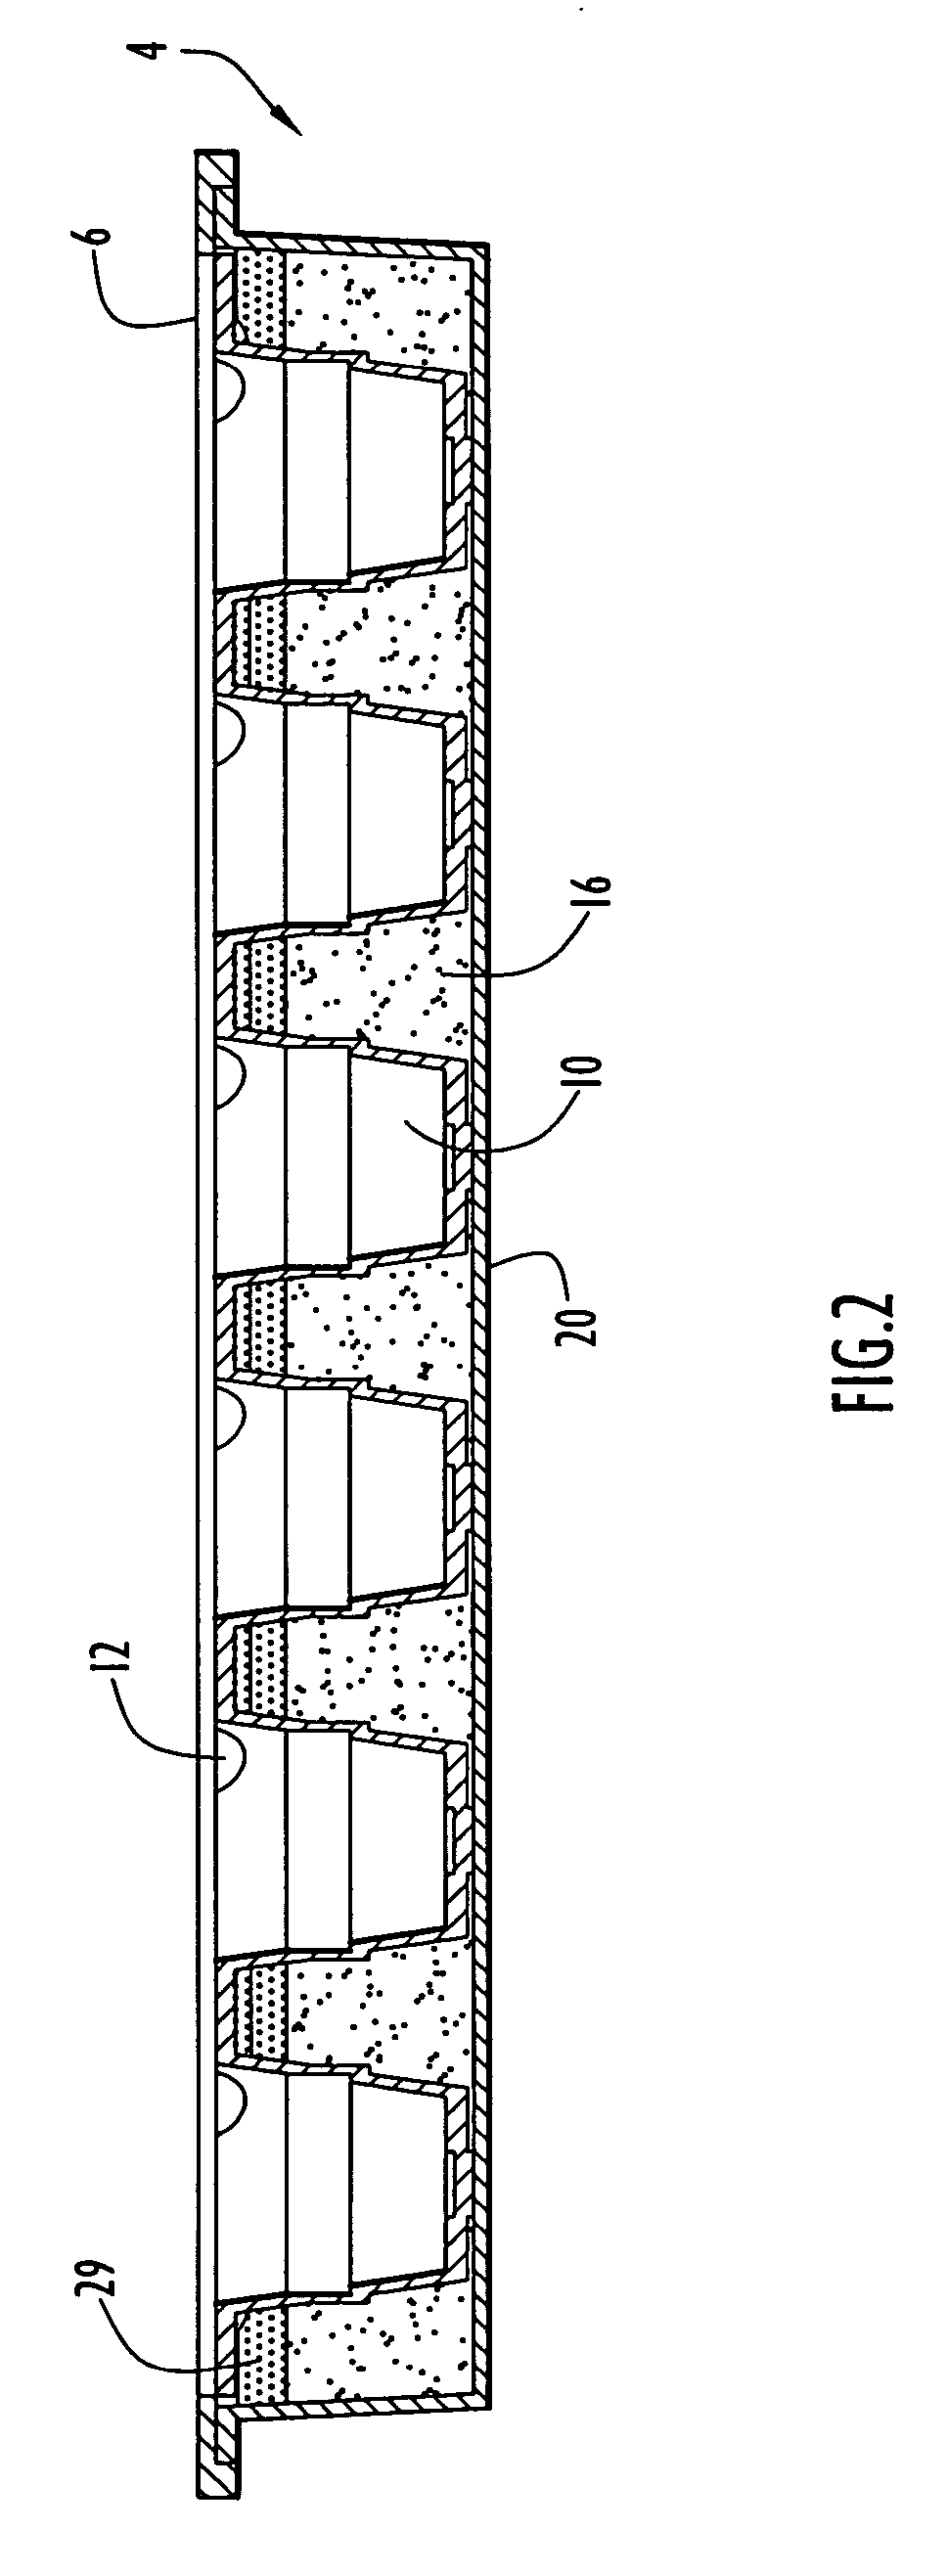 Portable thermal treatment and storage units for containing readily accessible food or beverage items and methods for thermally treating food or beverage items